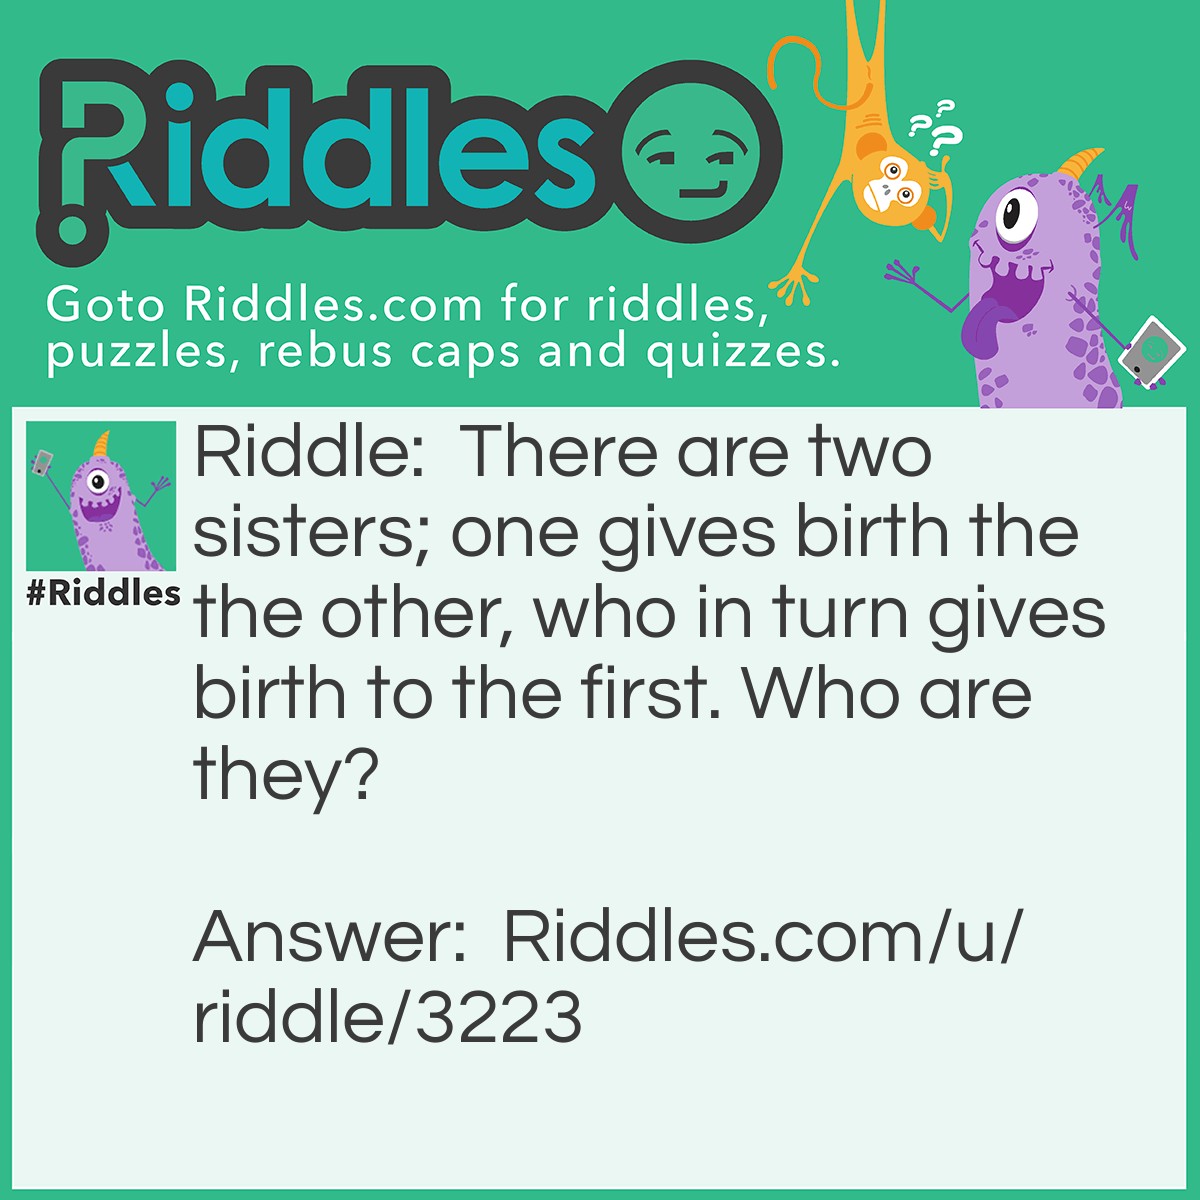 Riddle: There are two sisters; one gives birth the the other, who in turn gives birth to the first. Who are they? Answer: Day and night.